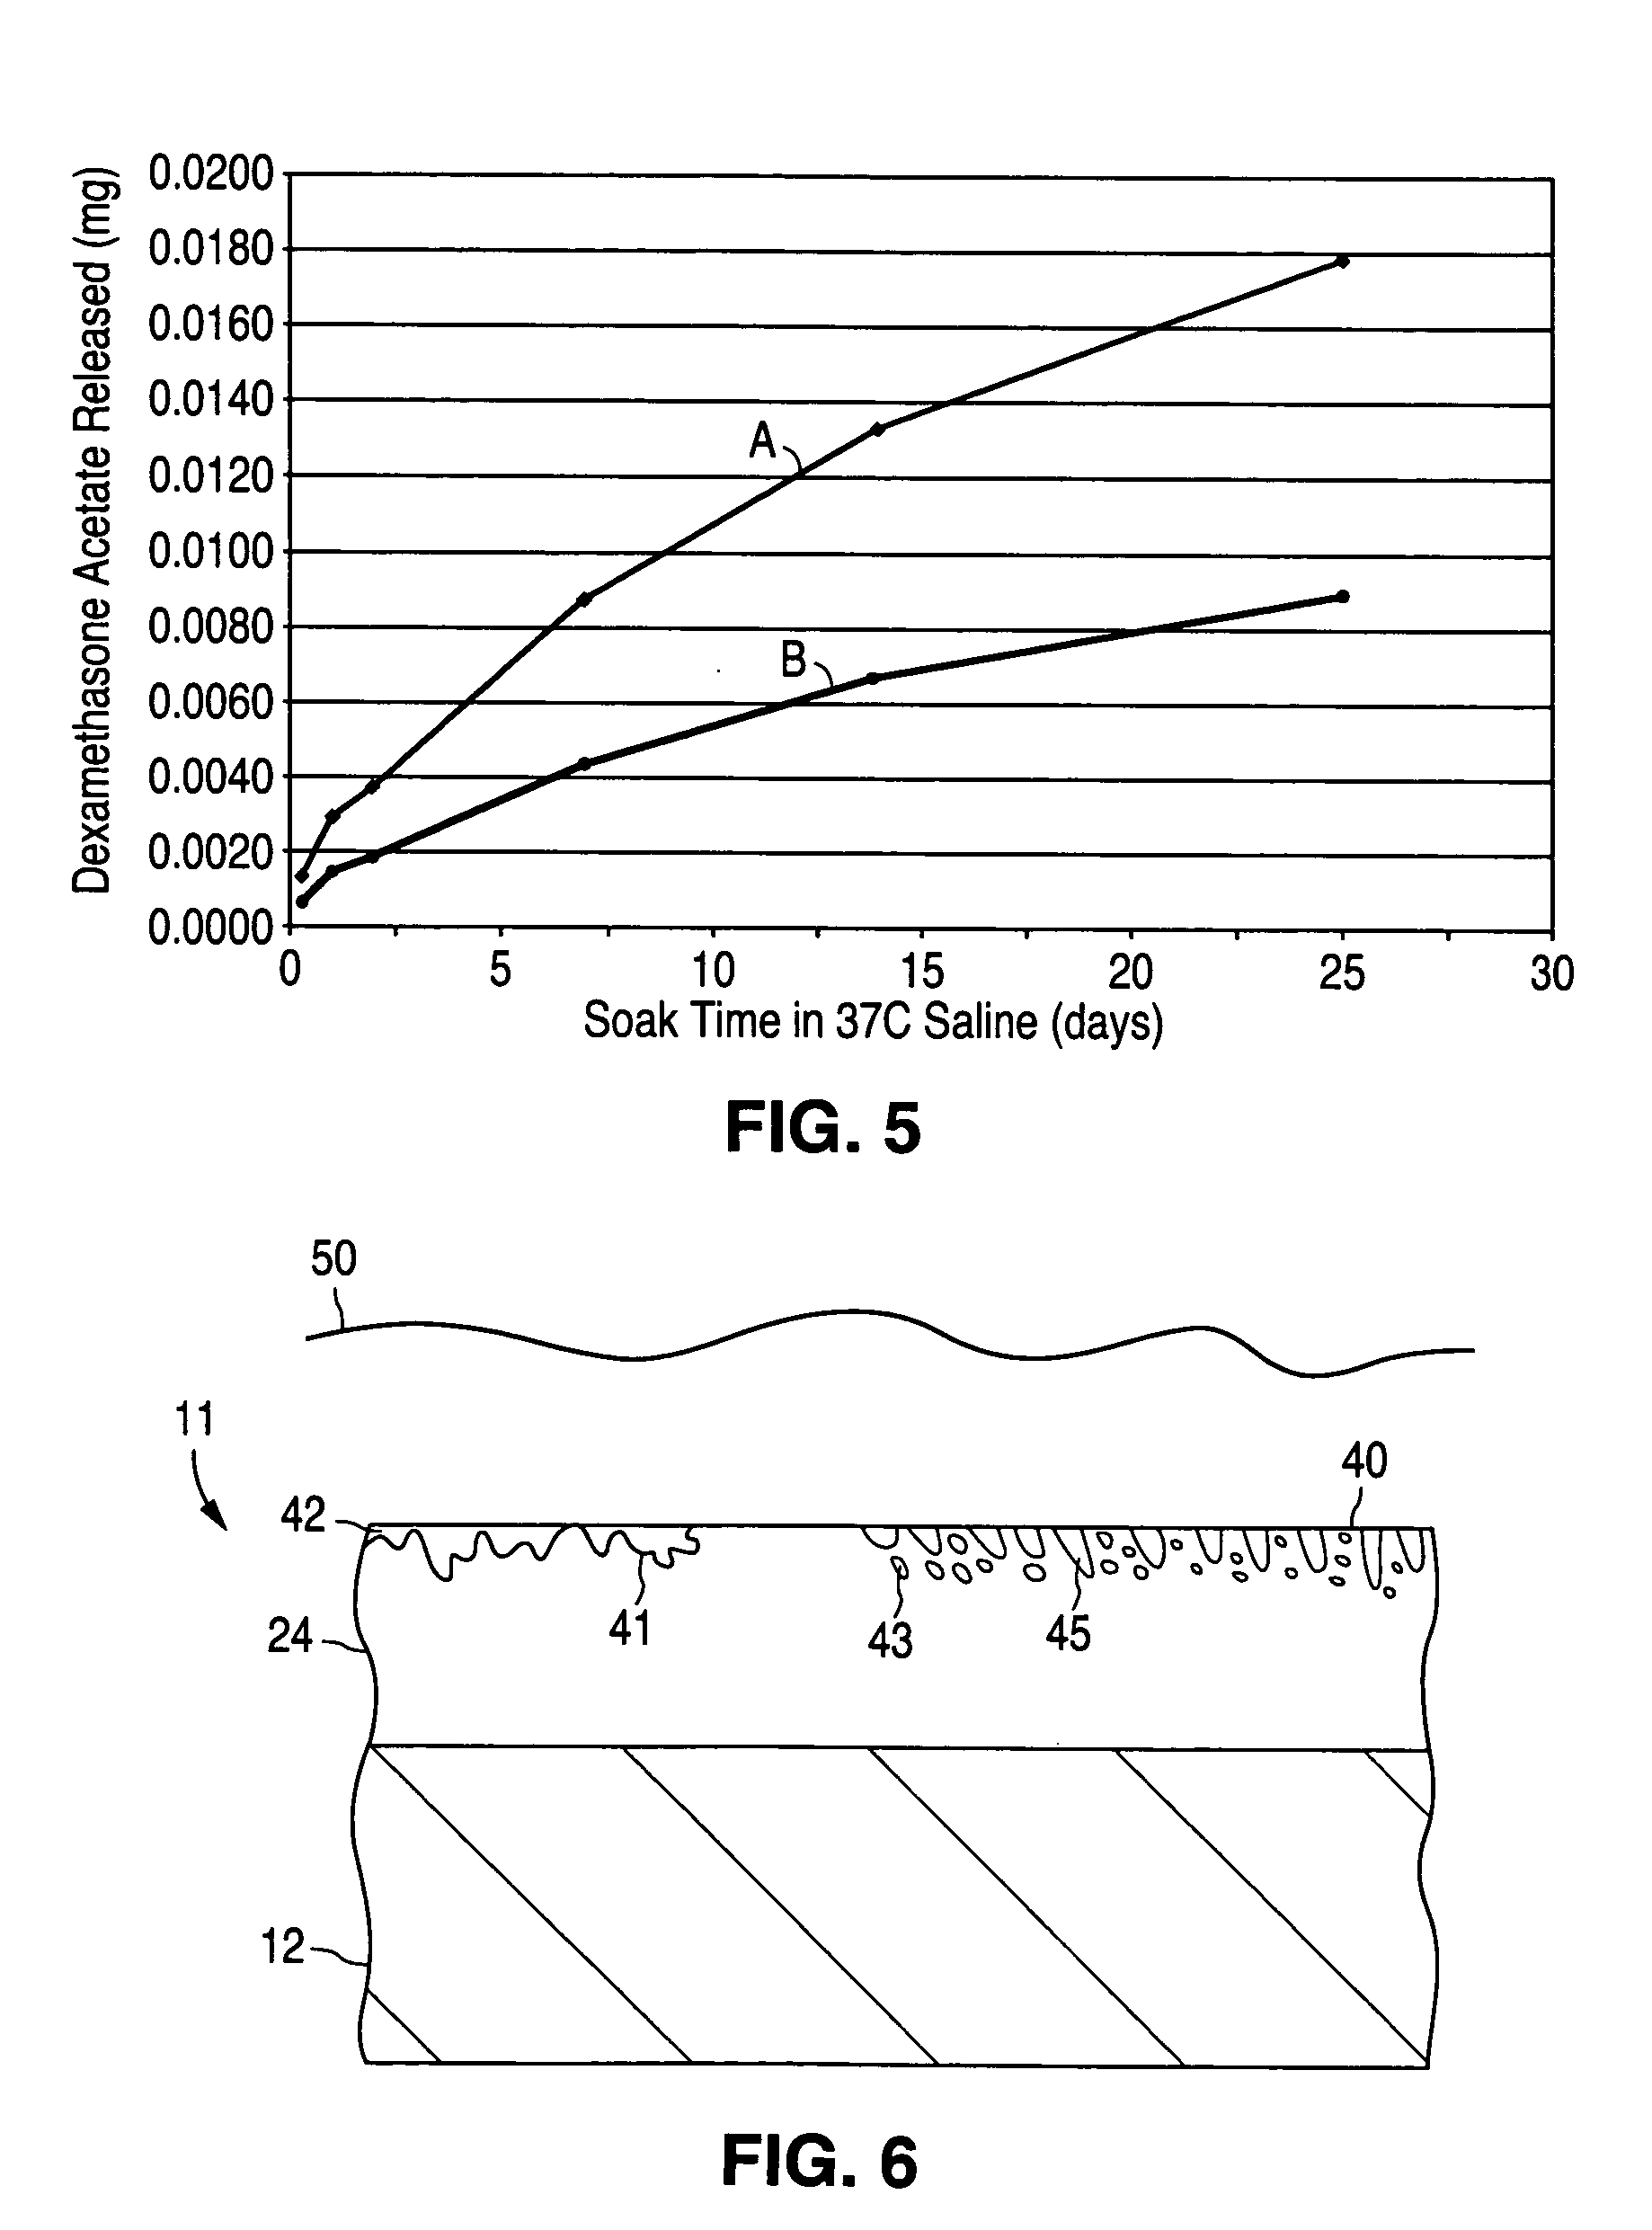 Barriers for polymer-coated implantable medical devices and methods for making the same